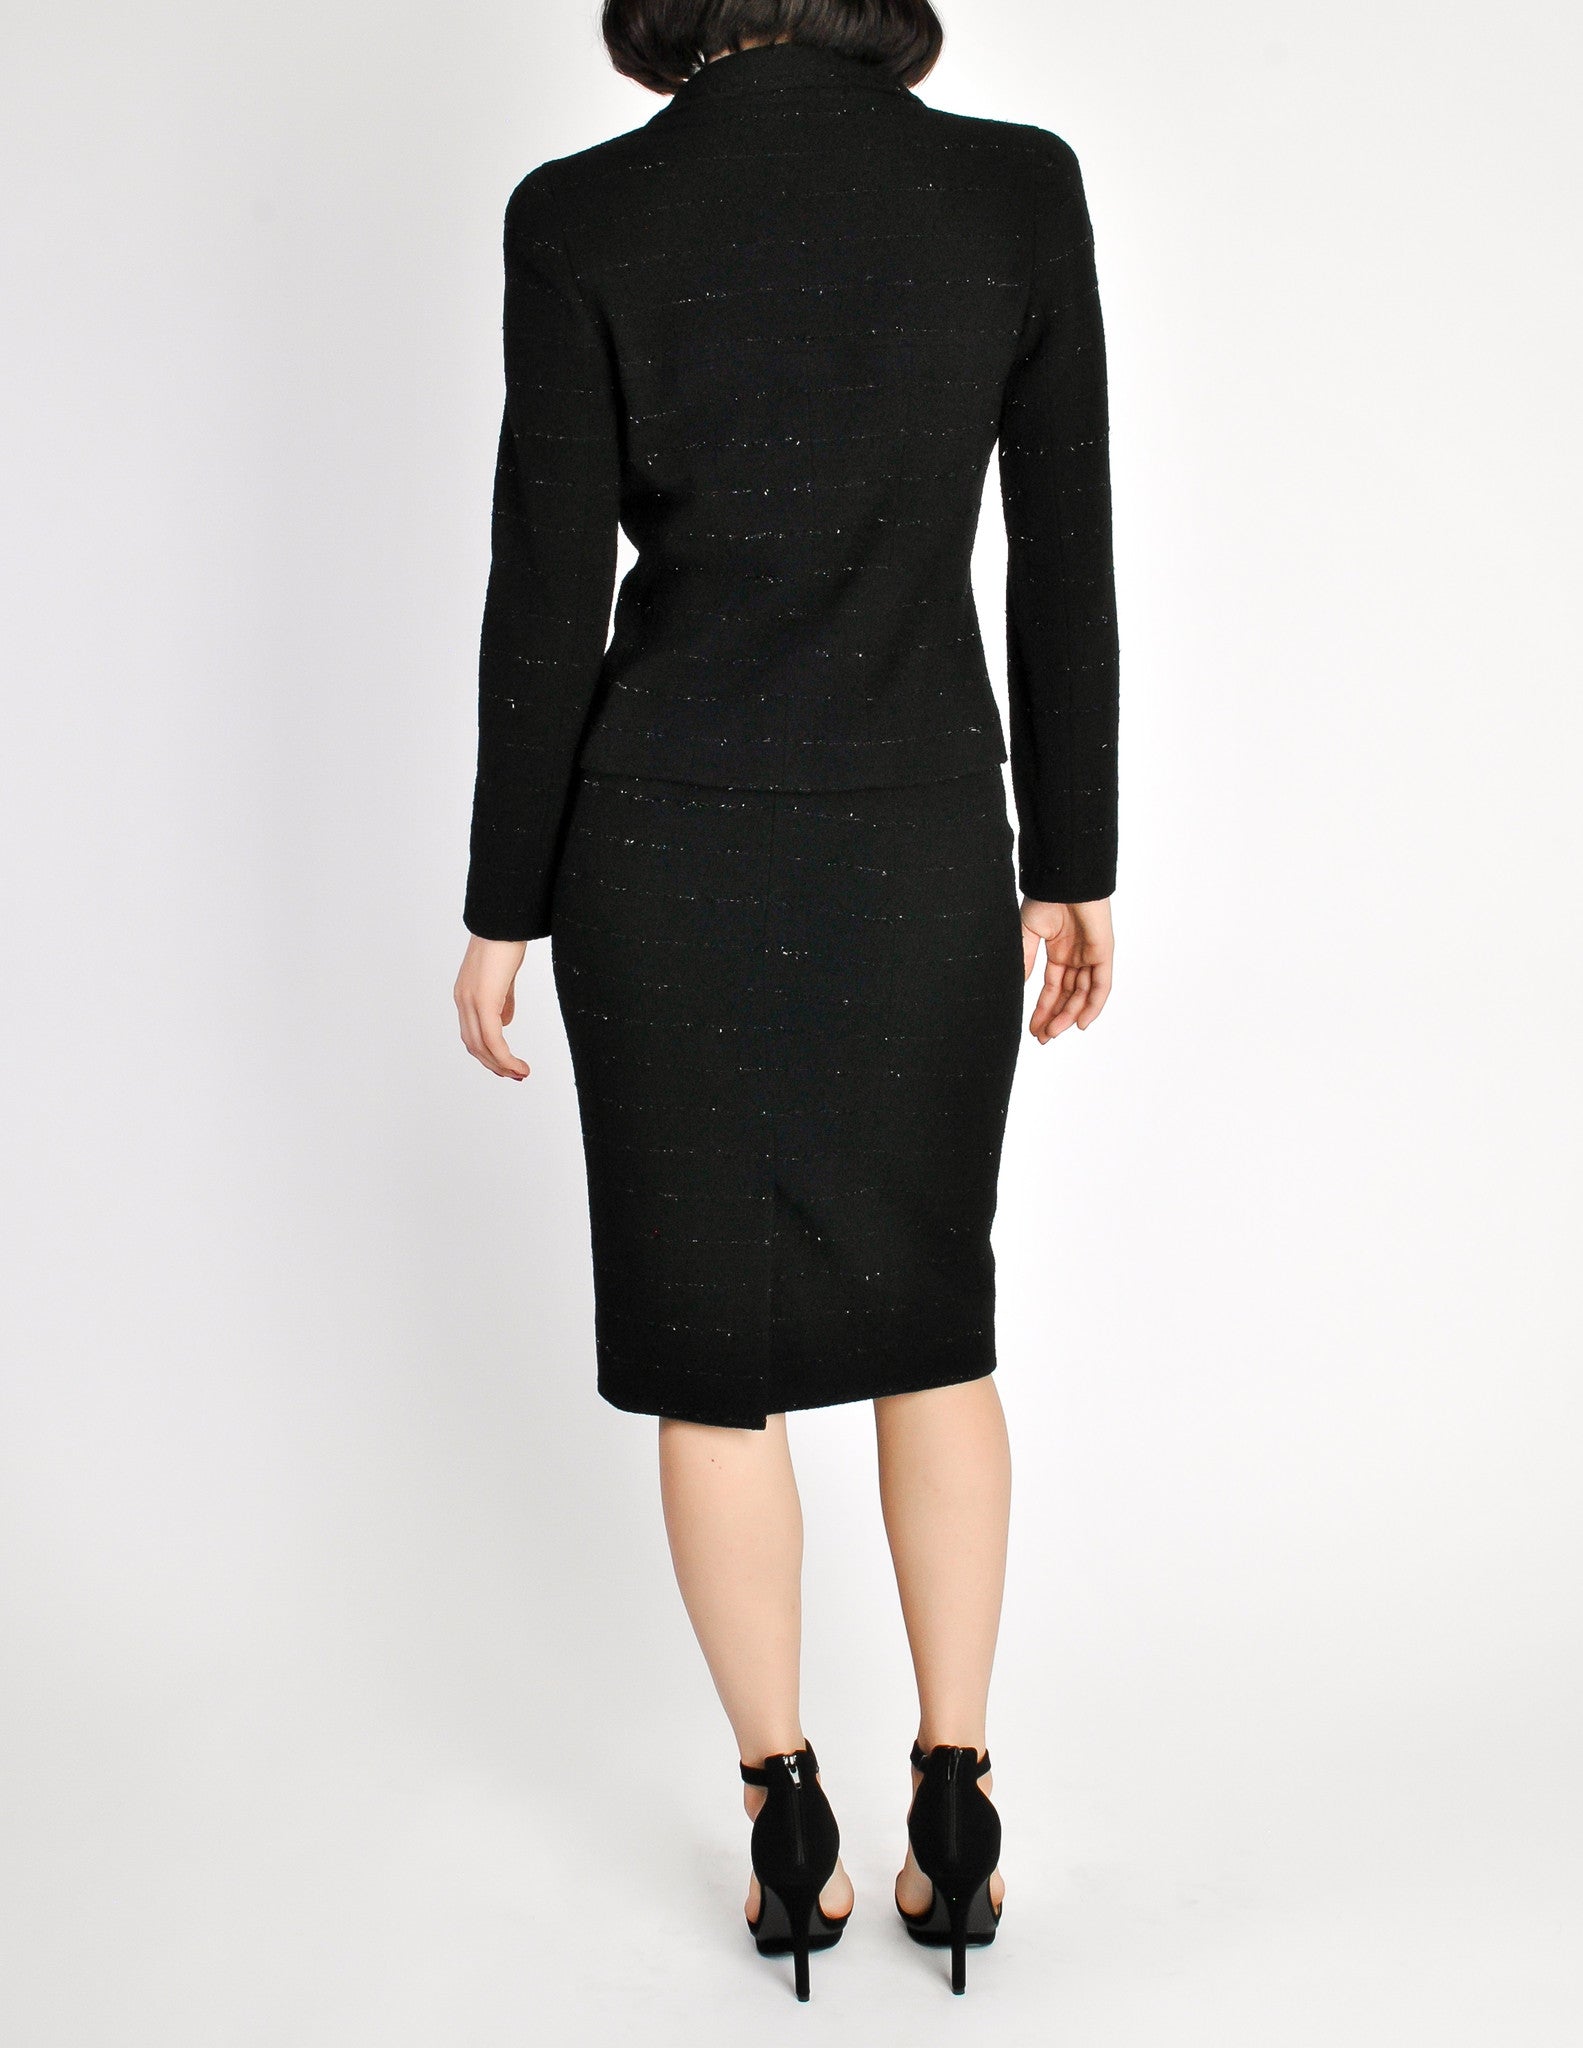 Chanel Vintage Black Wool Sparkly Two-Piece Suit - from Amarcord ...